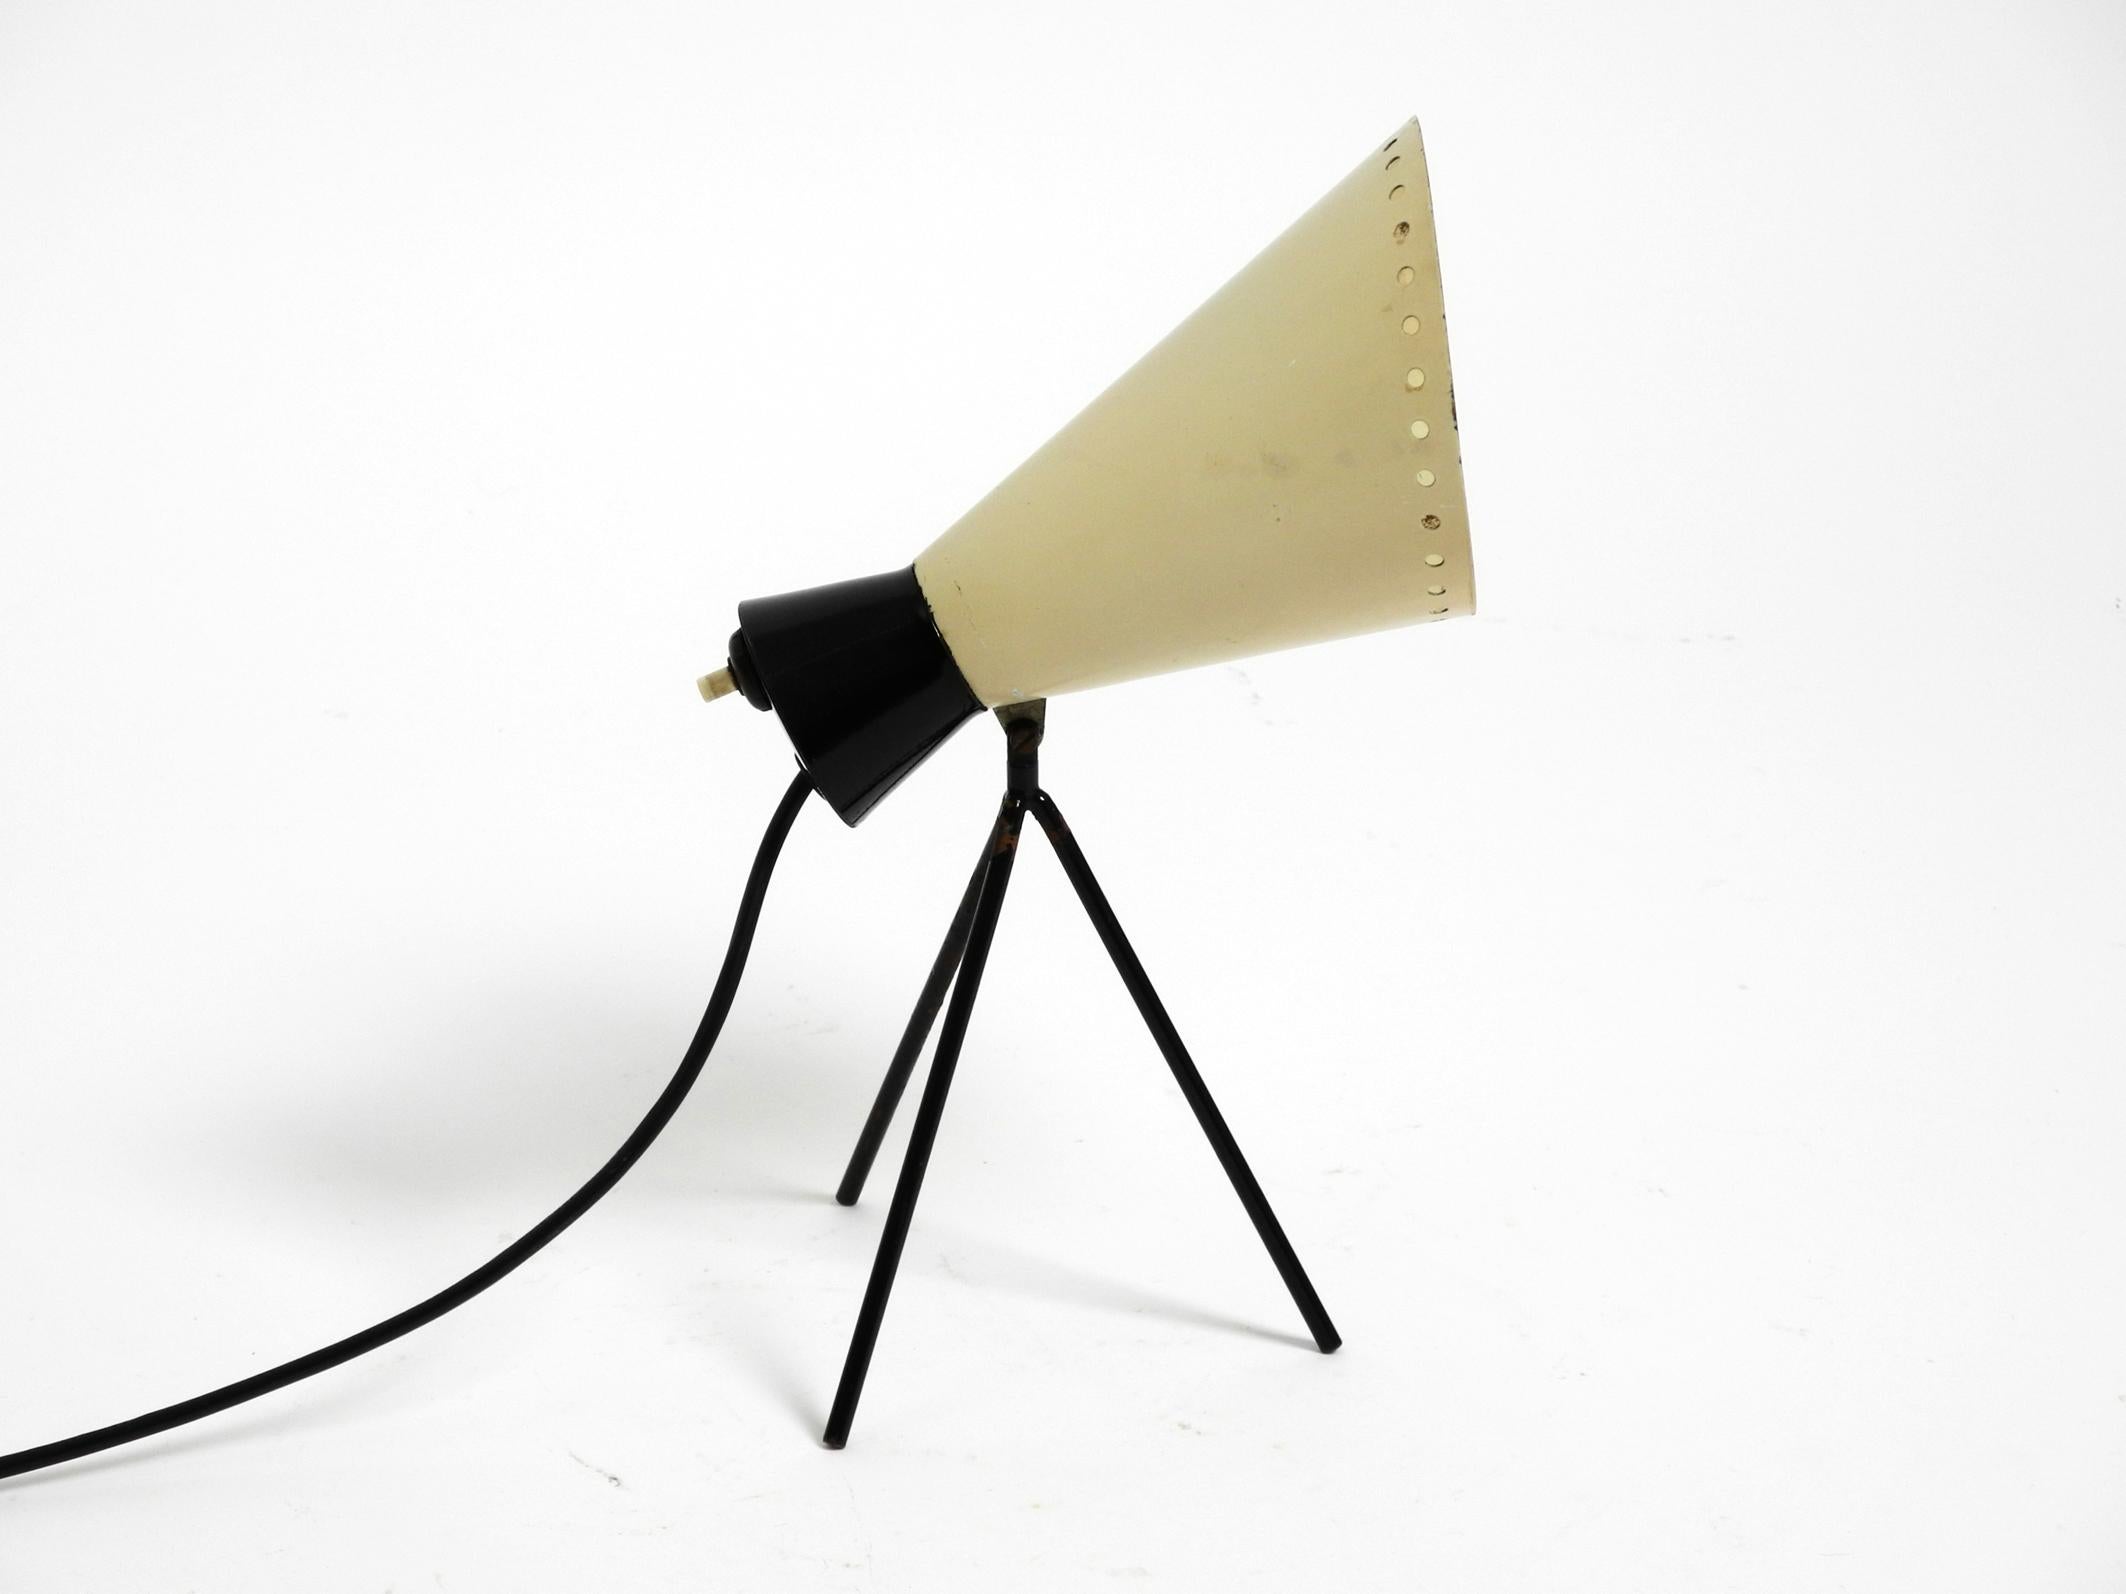 Great Mid Century Modern tripod table lamp by Josef Hurka.
Beautiful 50s design in the typical colors beige and black. Manufacturer is Napako. Made in Czech.
The absolute design classic from the 1950s.
The large lampshade can be swiveled up and